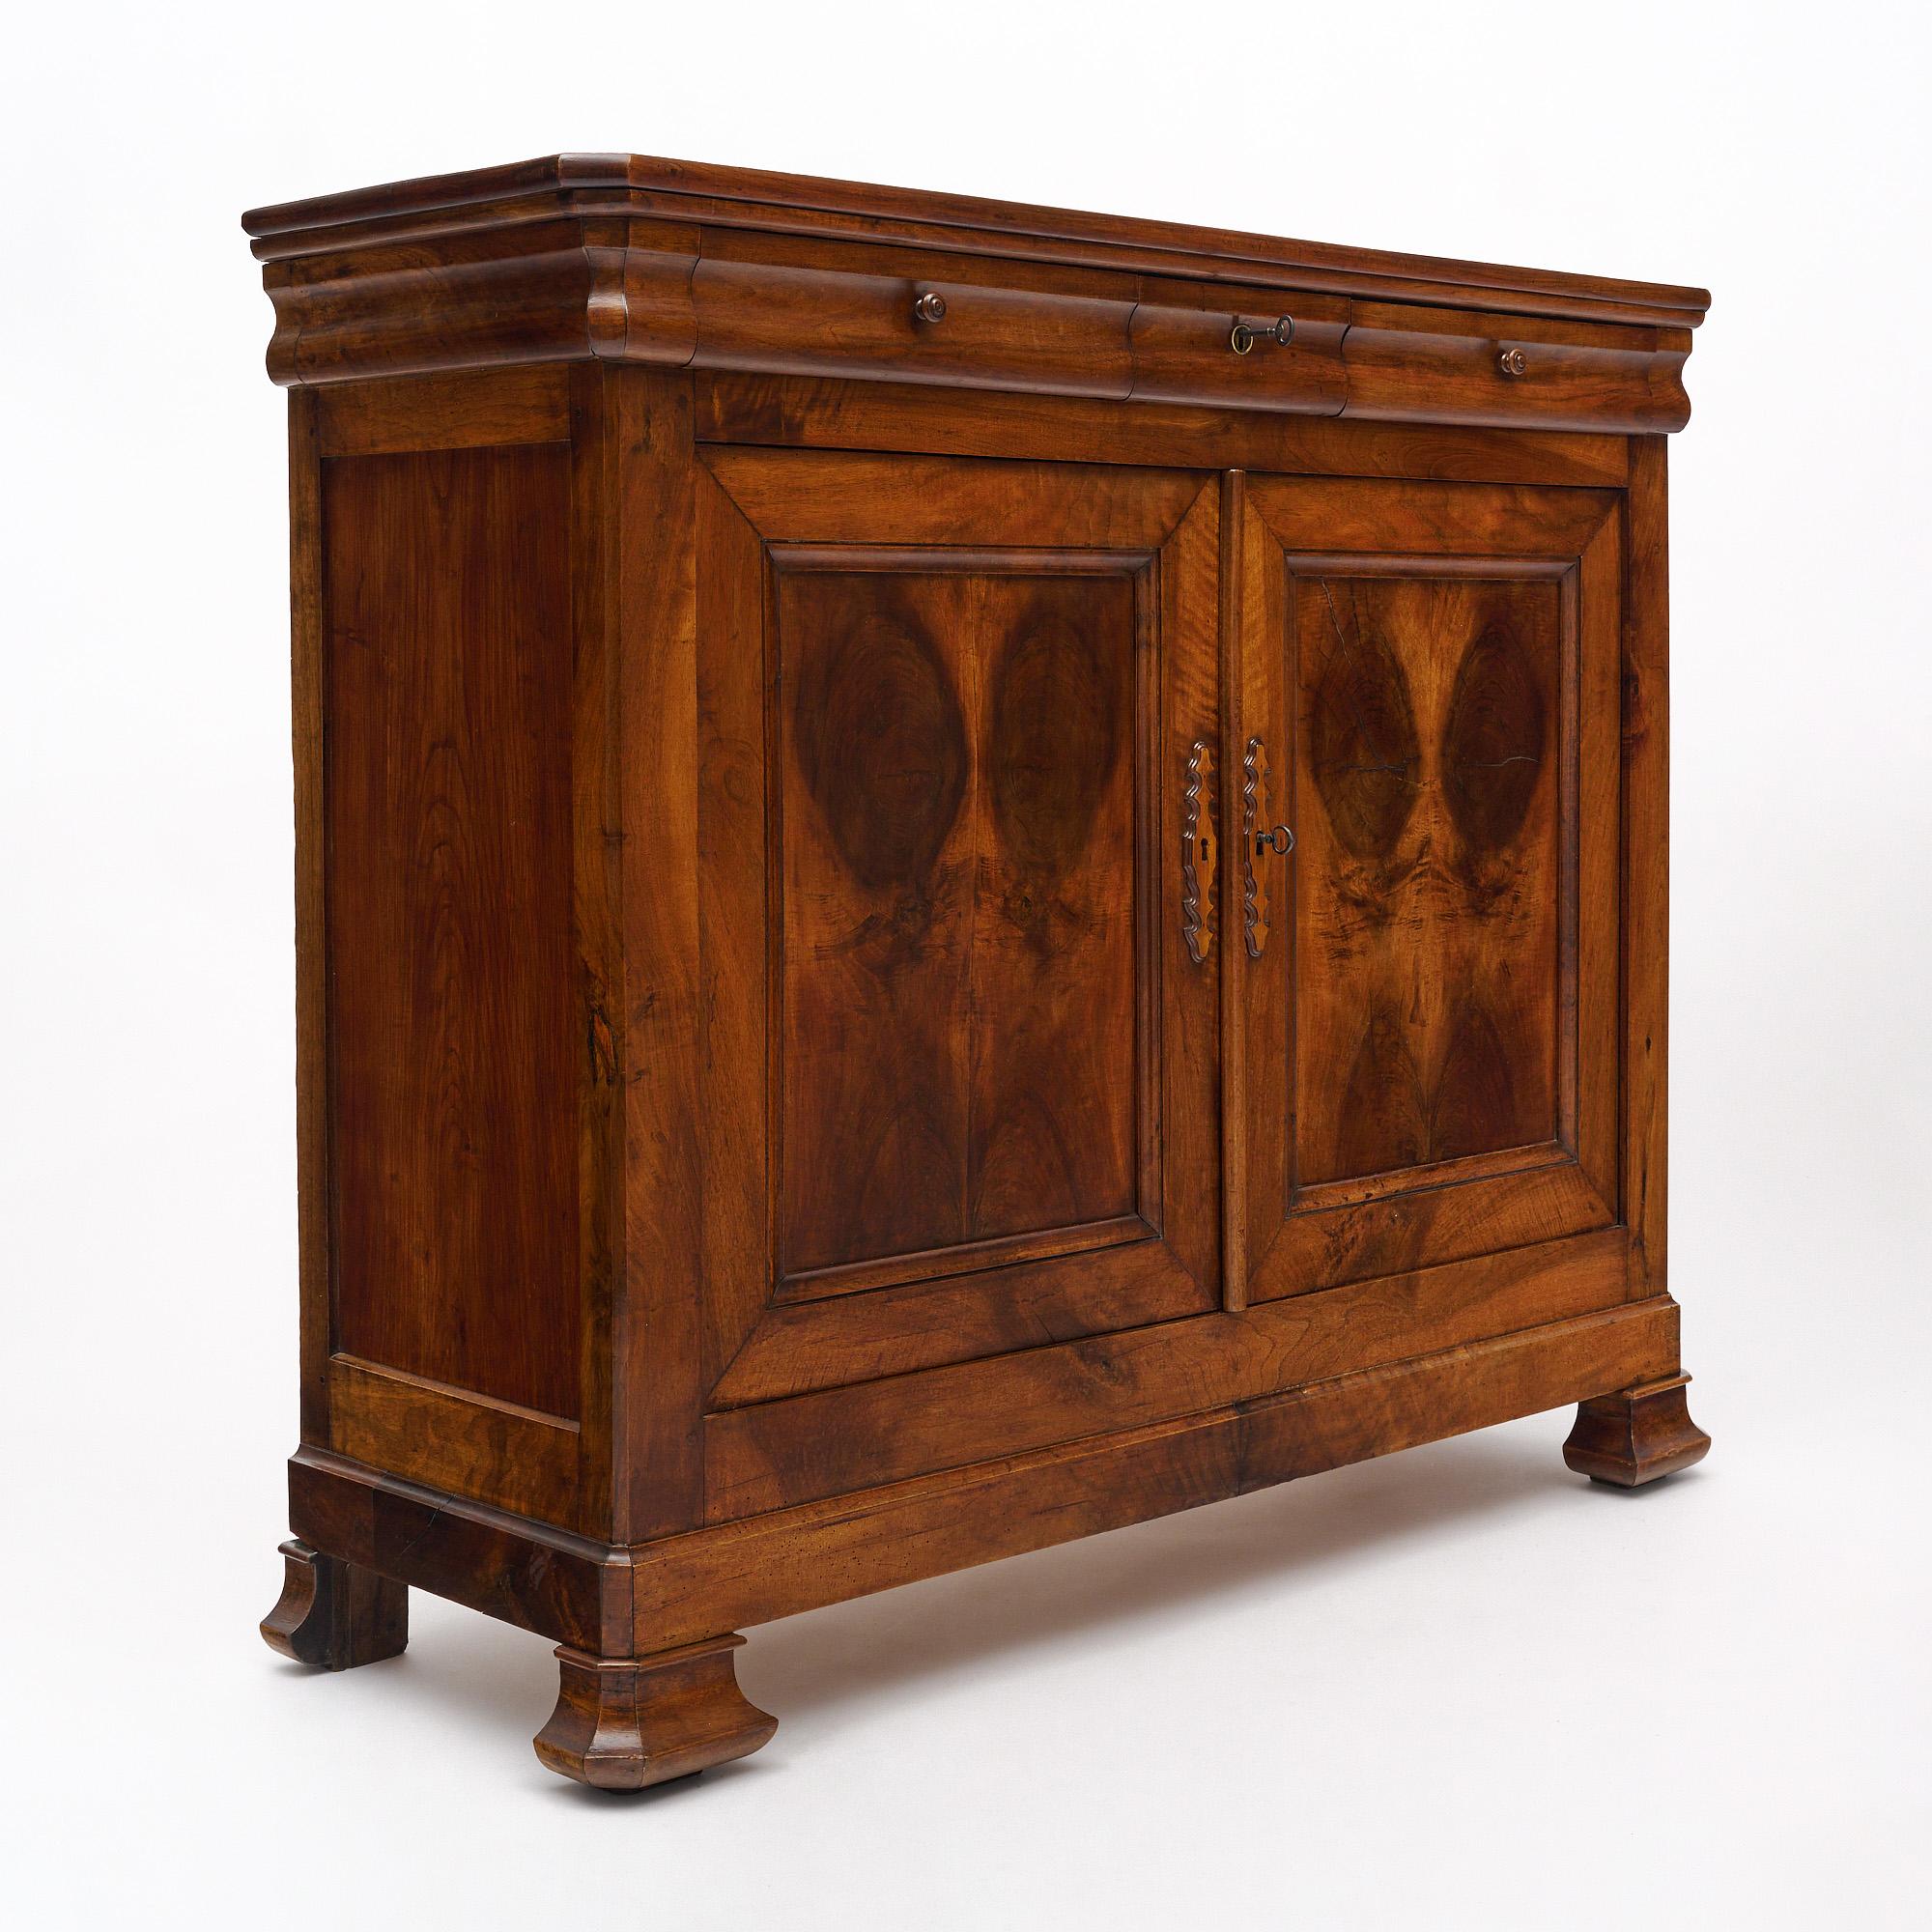 Buffet from the Louis Philippe period in France. This piece is made of burled walnut book matched on the door panels. It is from the Rhone Valley. The three drawers are dovetailed and softened by the 